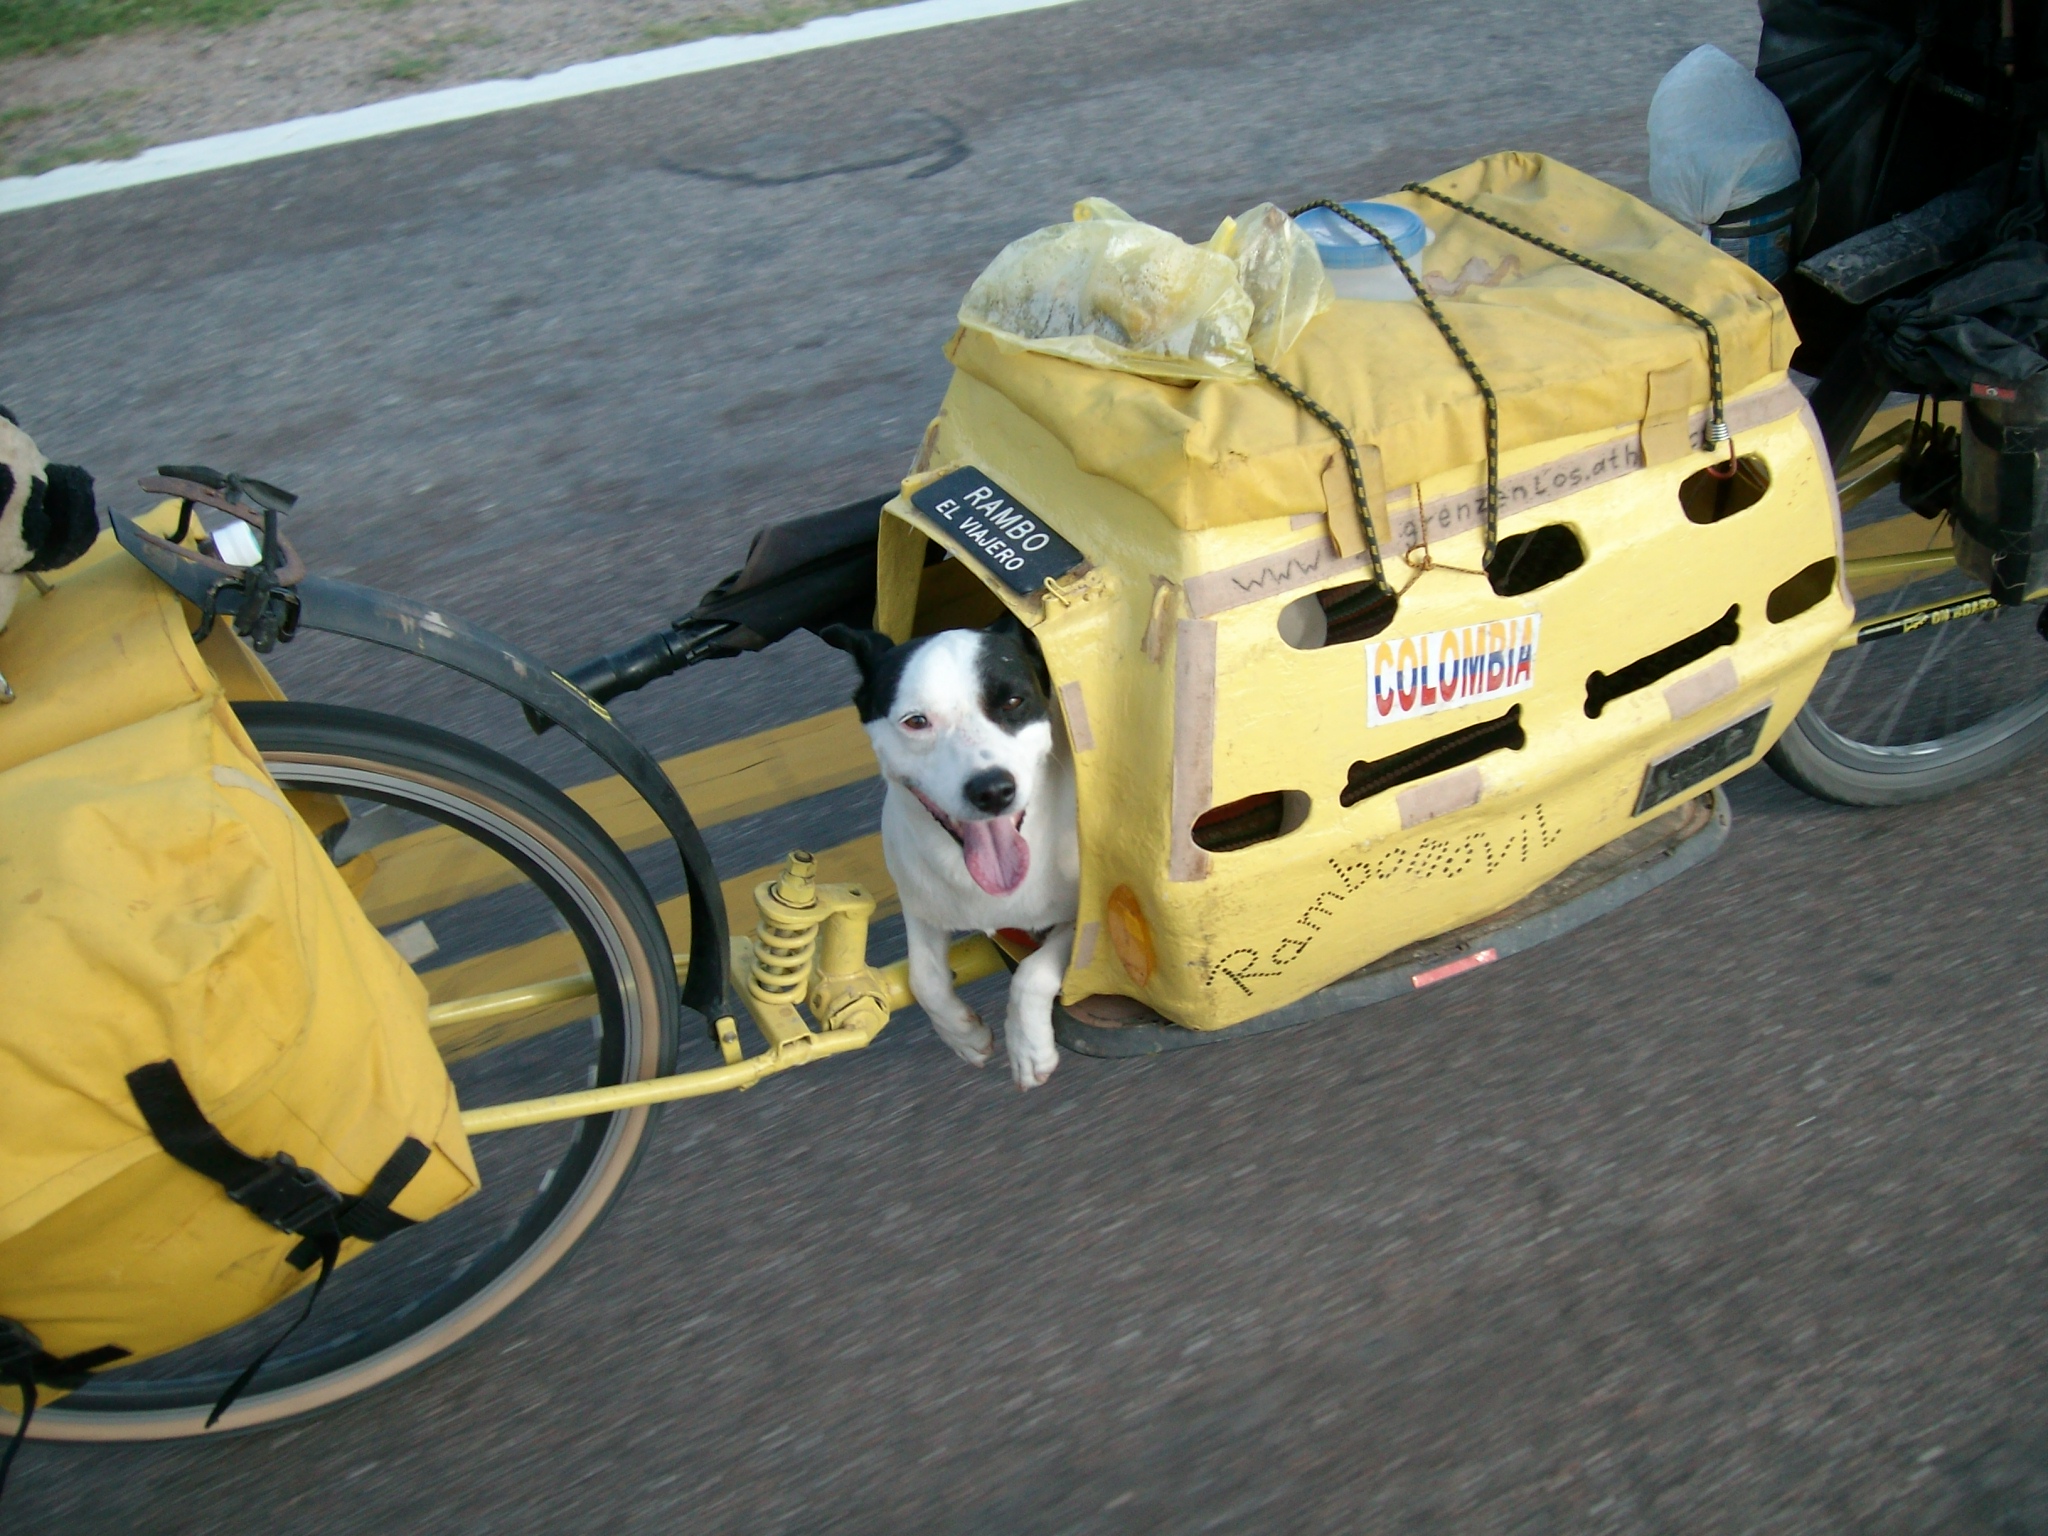 bike buggy for dogs